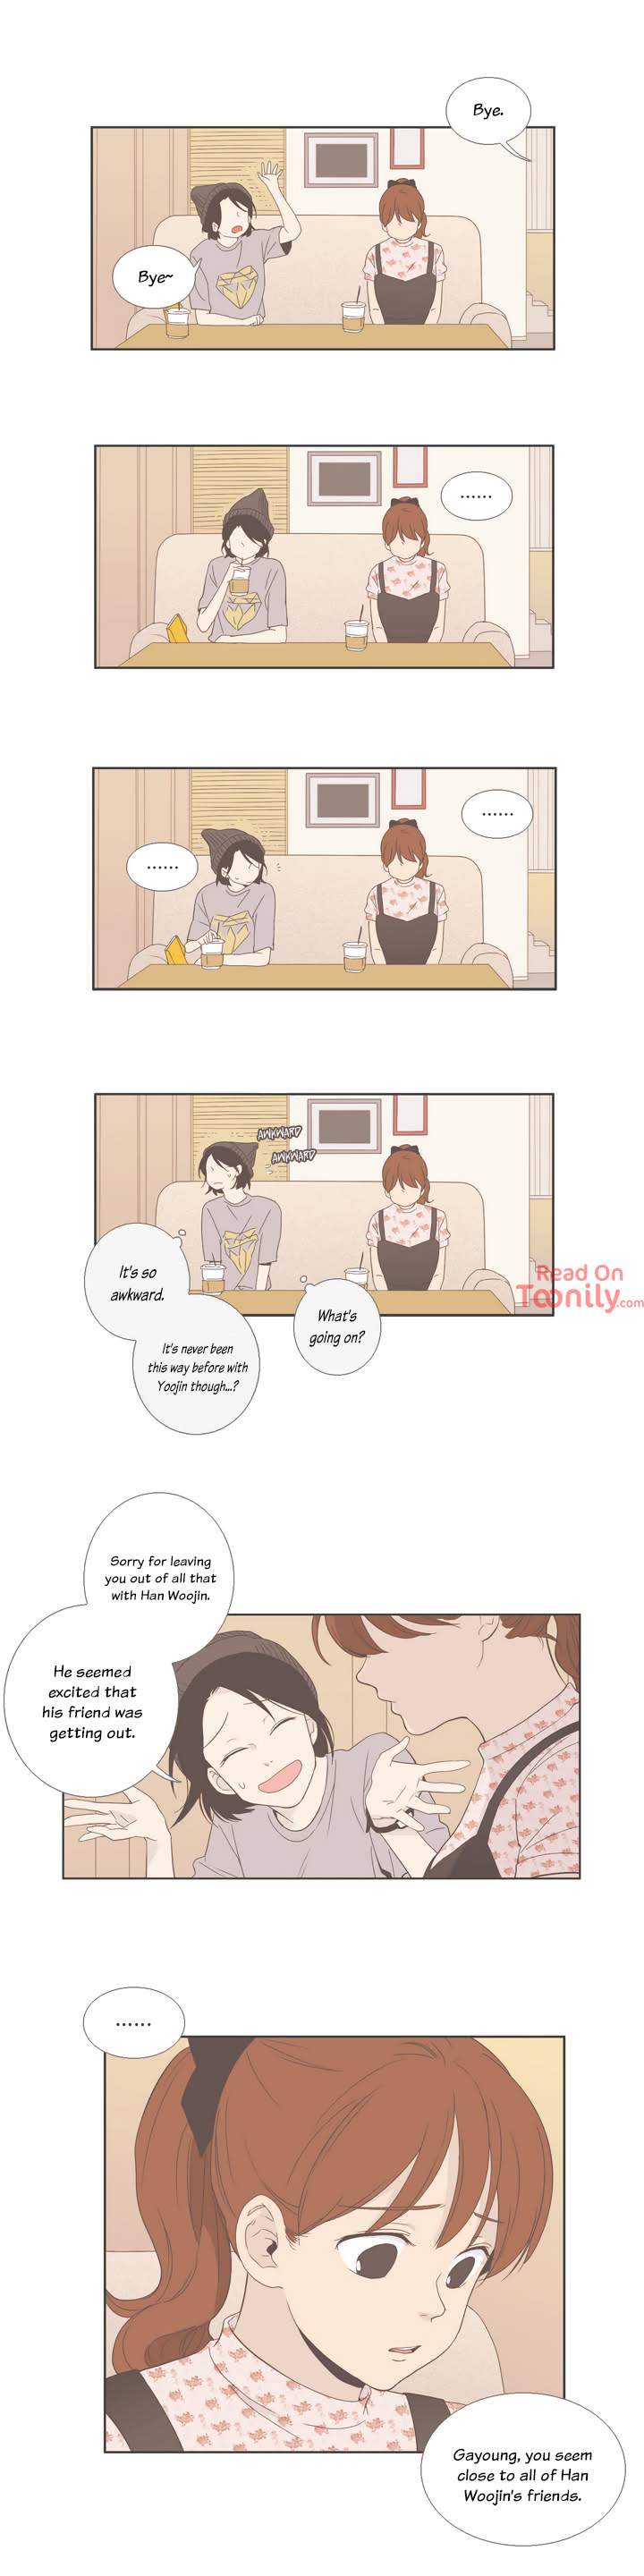 Something About Us - Chapter 31 Page 10